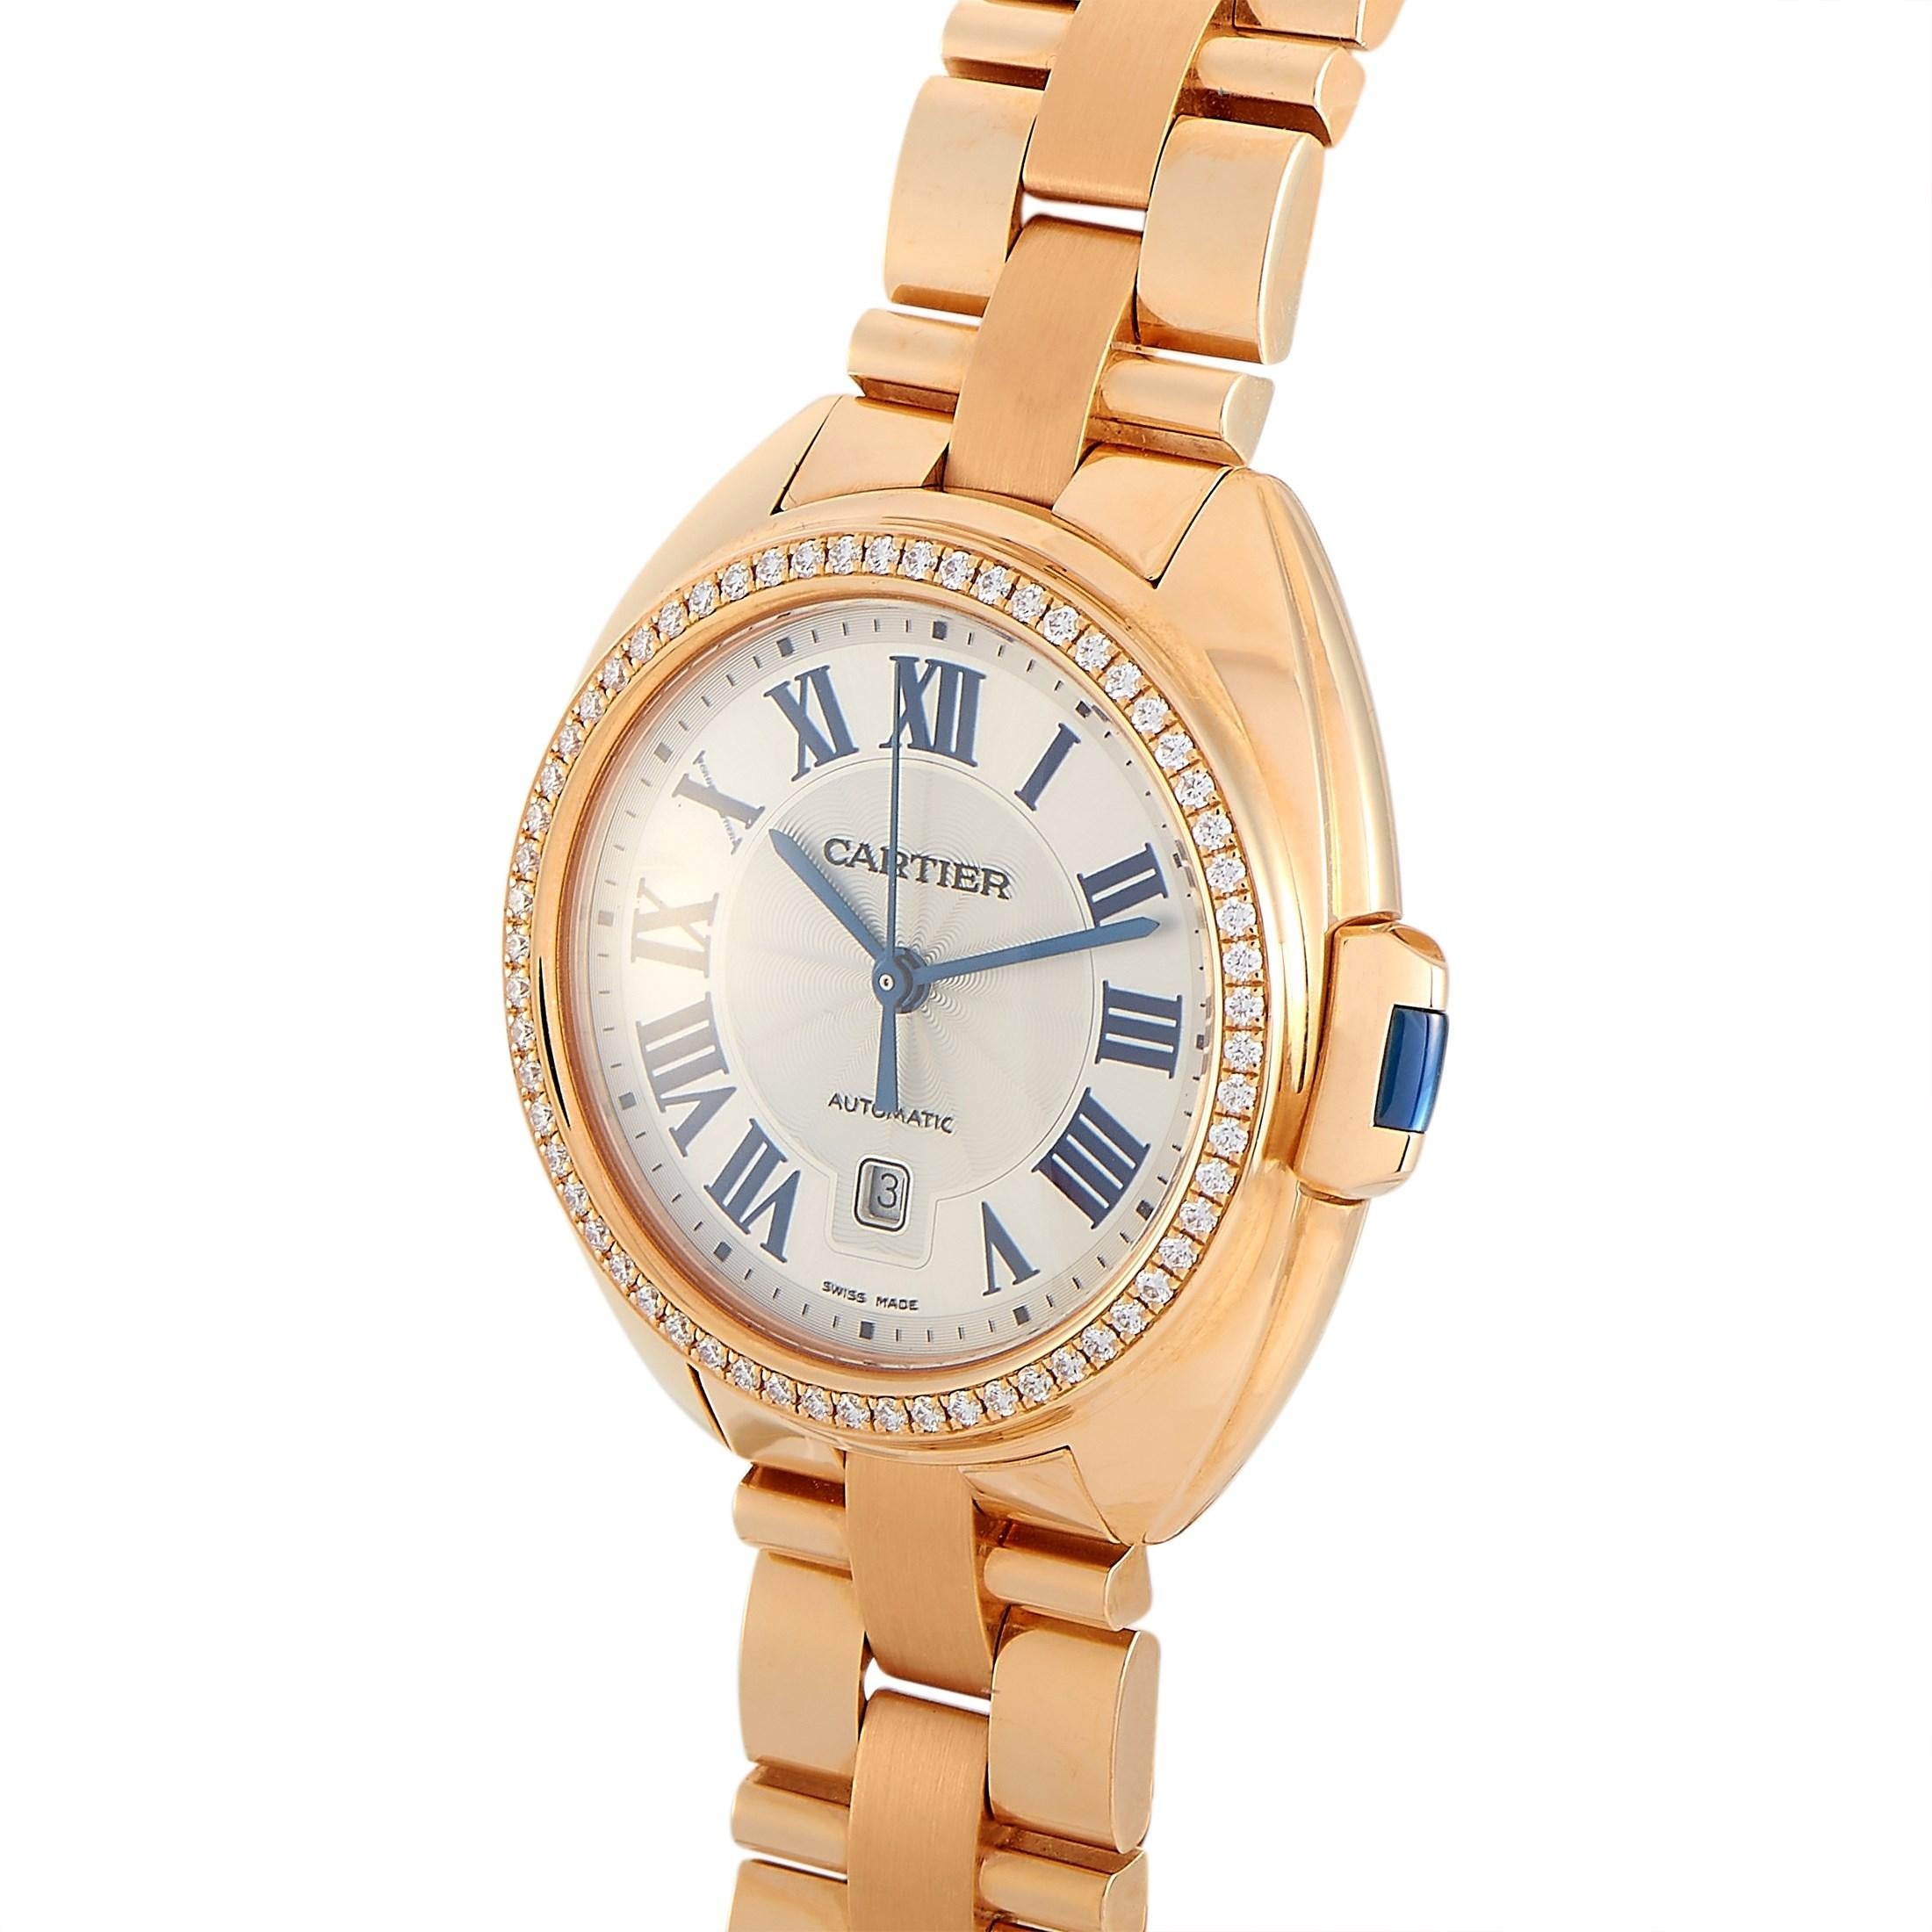 A classy timepiece with a rounded profile, the Cartier Clé de Cartier Ladies Watch WJCL0003 elegantly flexes its soft curves, clean lines, and unique character. Designed with a fixed 18K rose gold bezel set with diamonds, this watch has a Silver